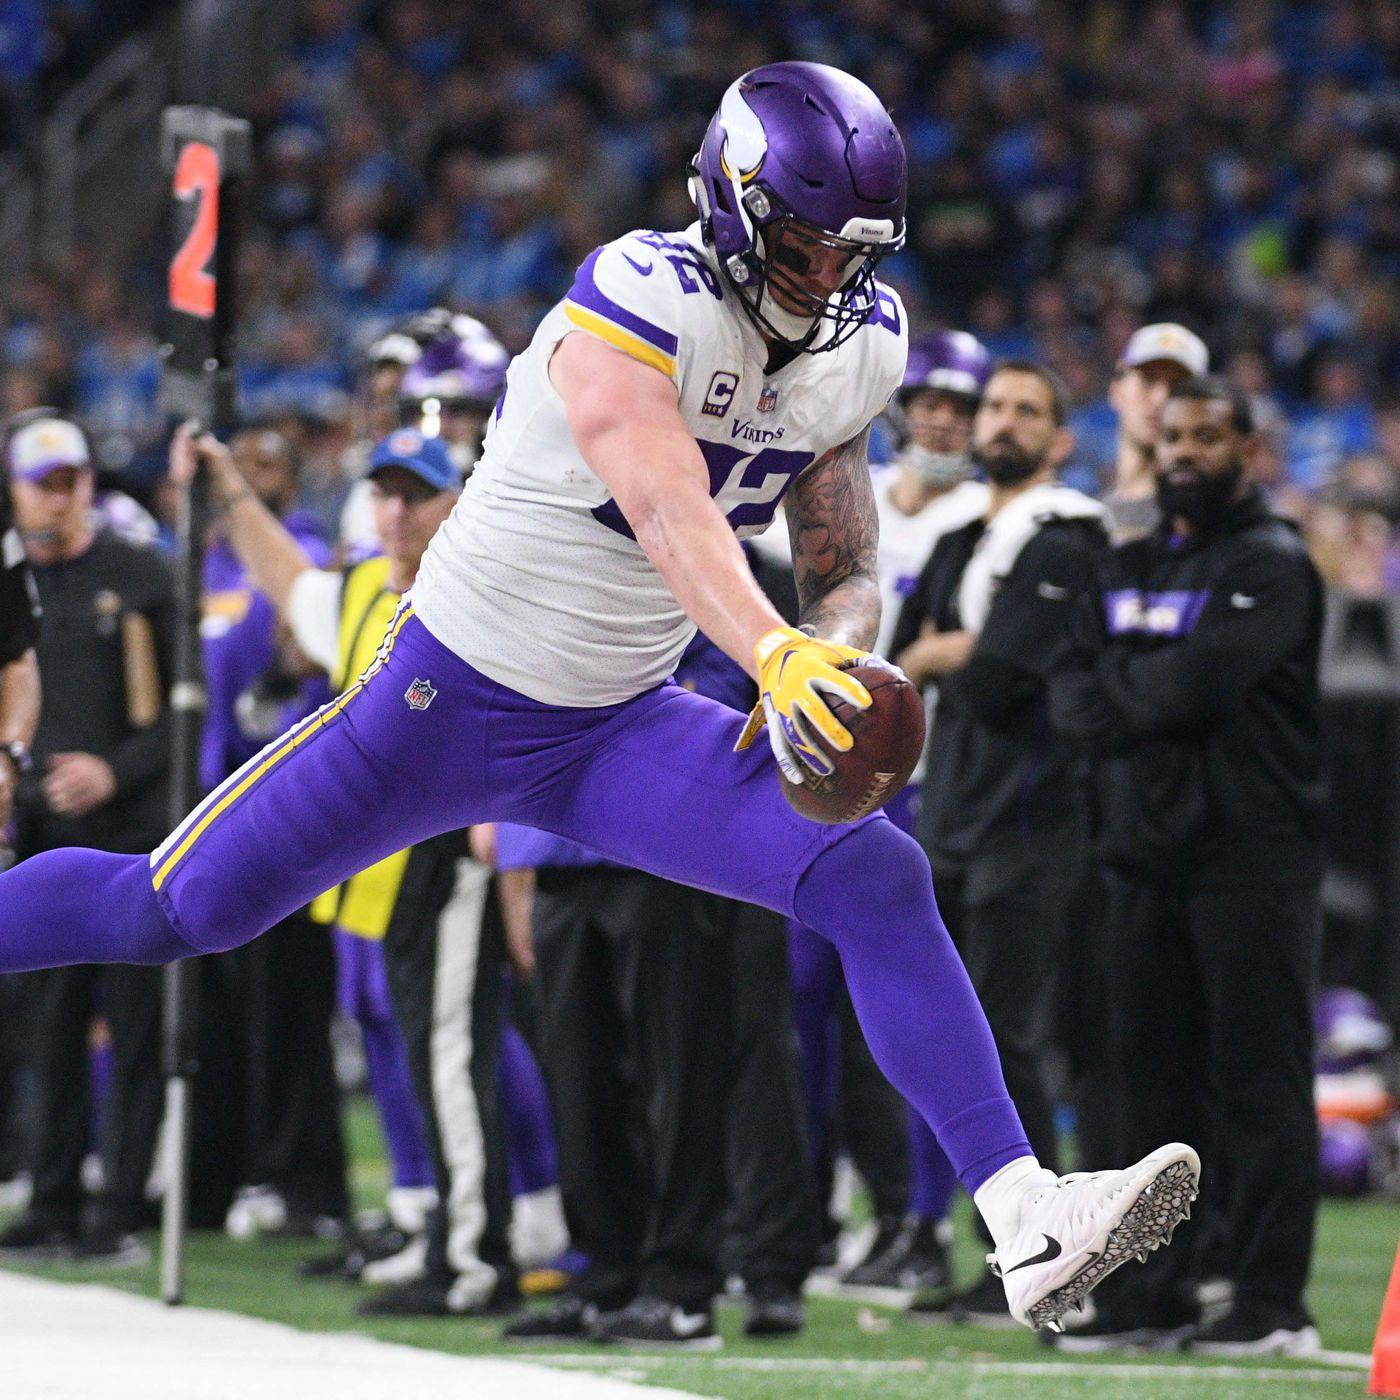 Nearly all of the Minnesota Vikings' 2019 opponents have been